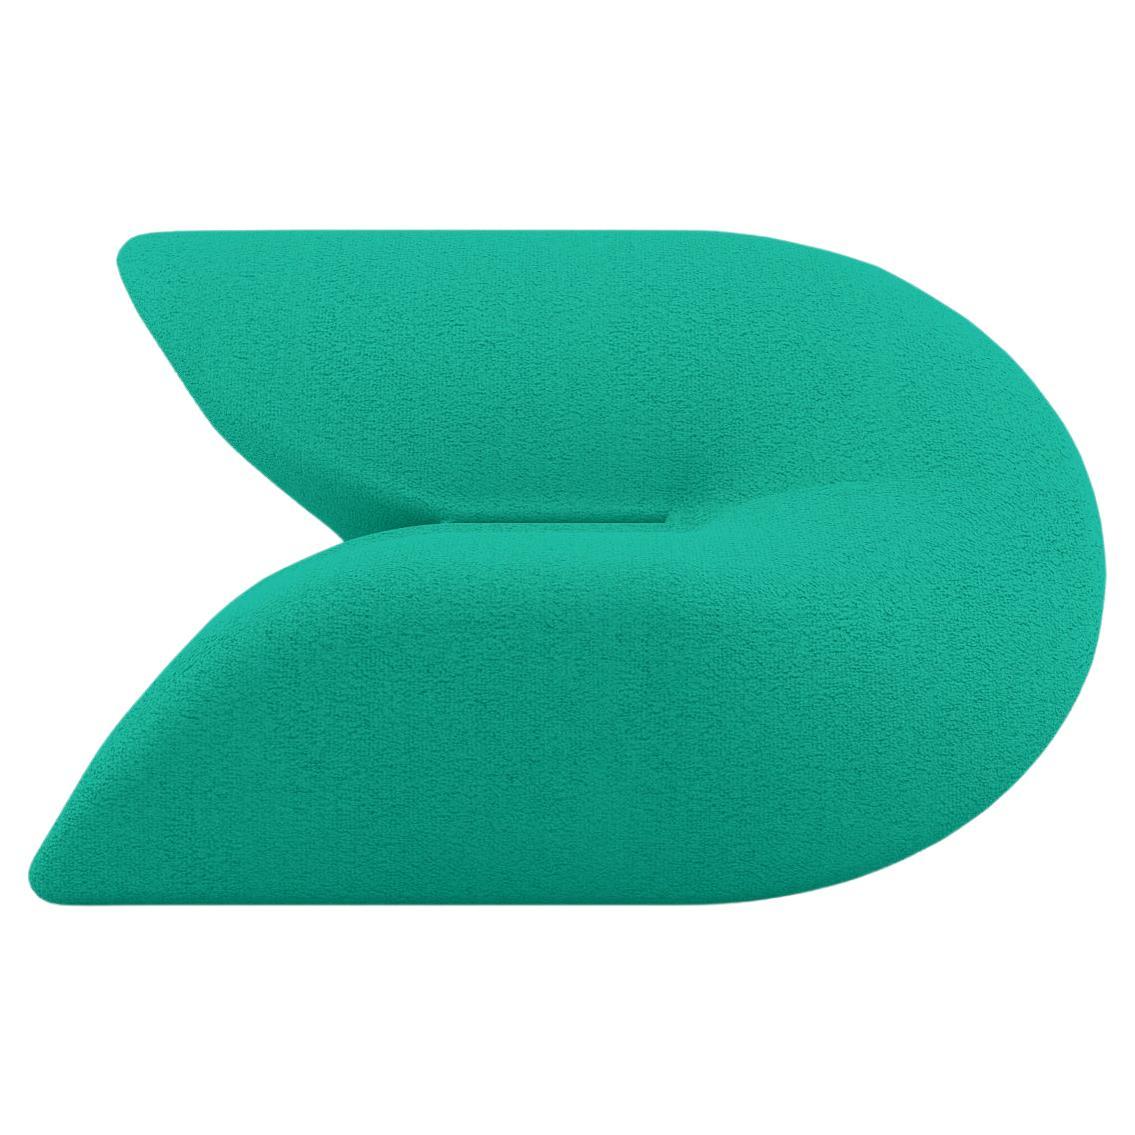 Delta Armchair - Modern Turquoise Upholstered Armchair For Sale